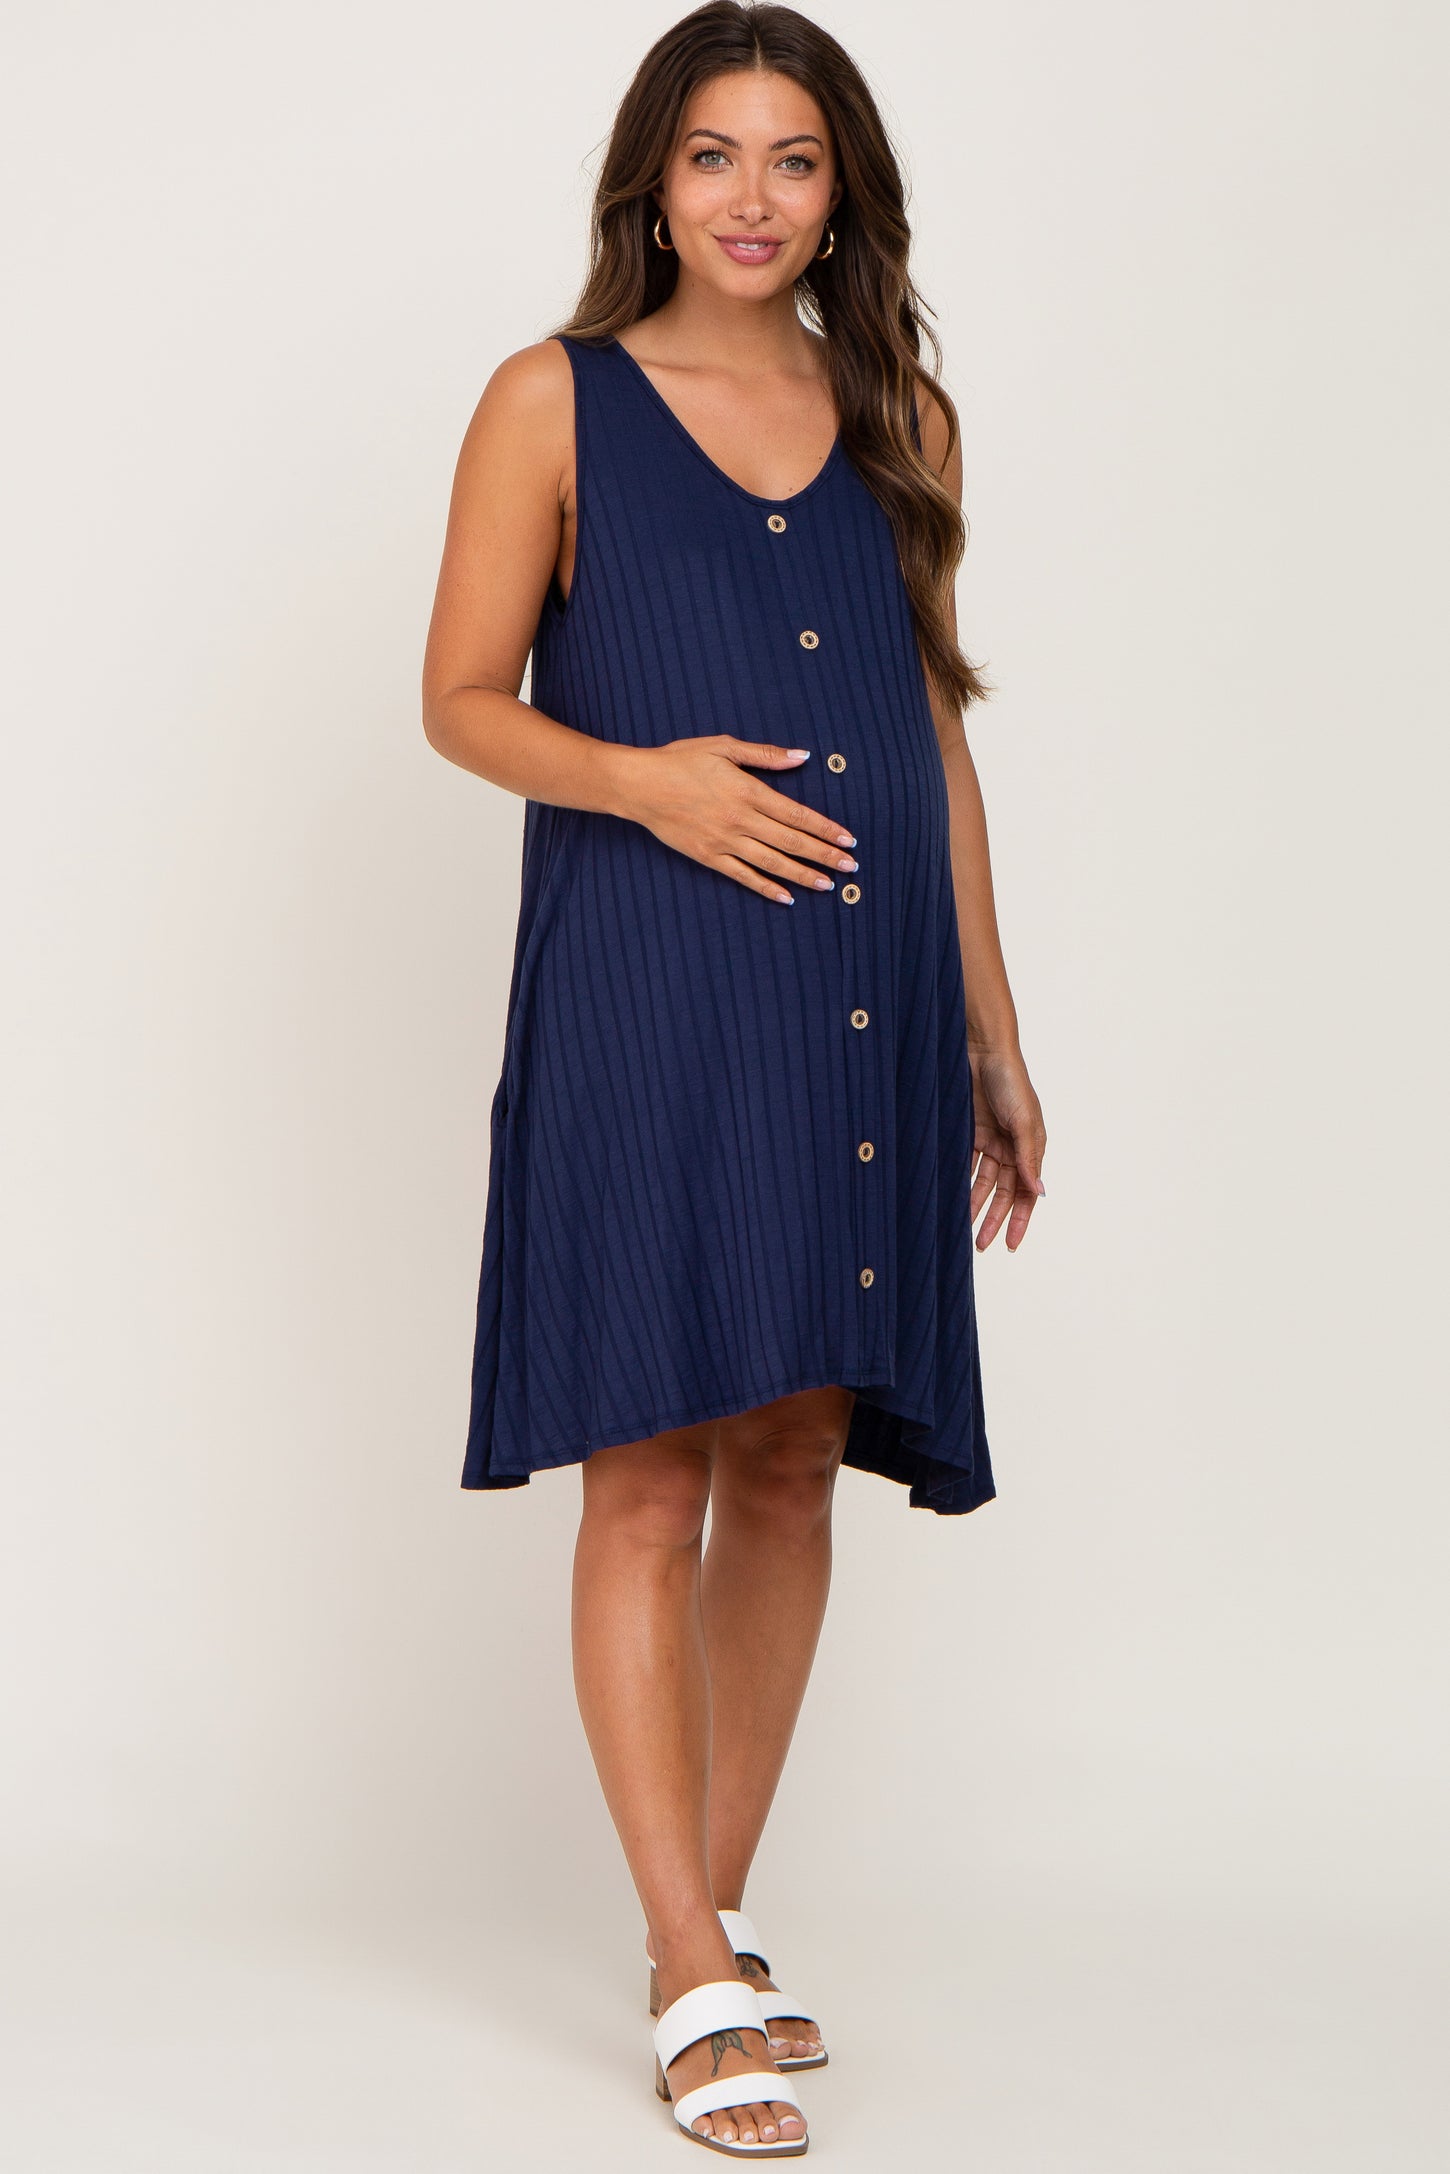 Navy Blue Ribbed Button Front Accent Maternity Dress